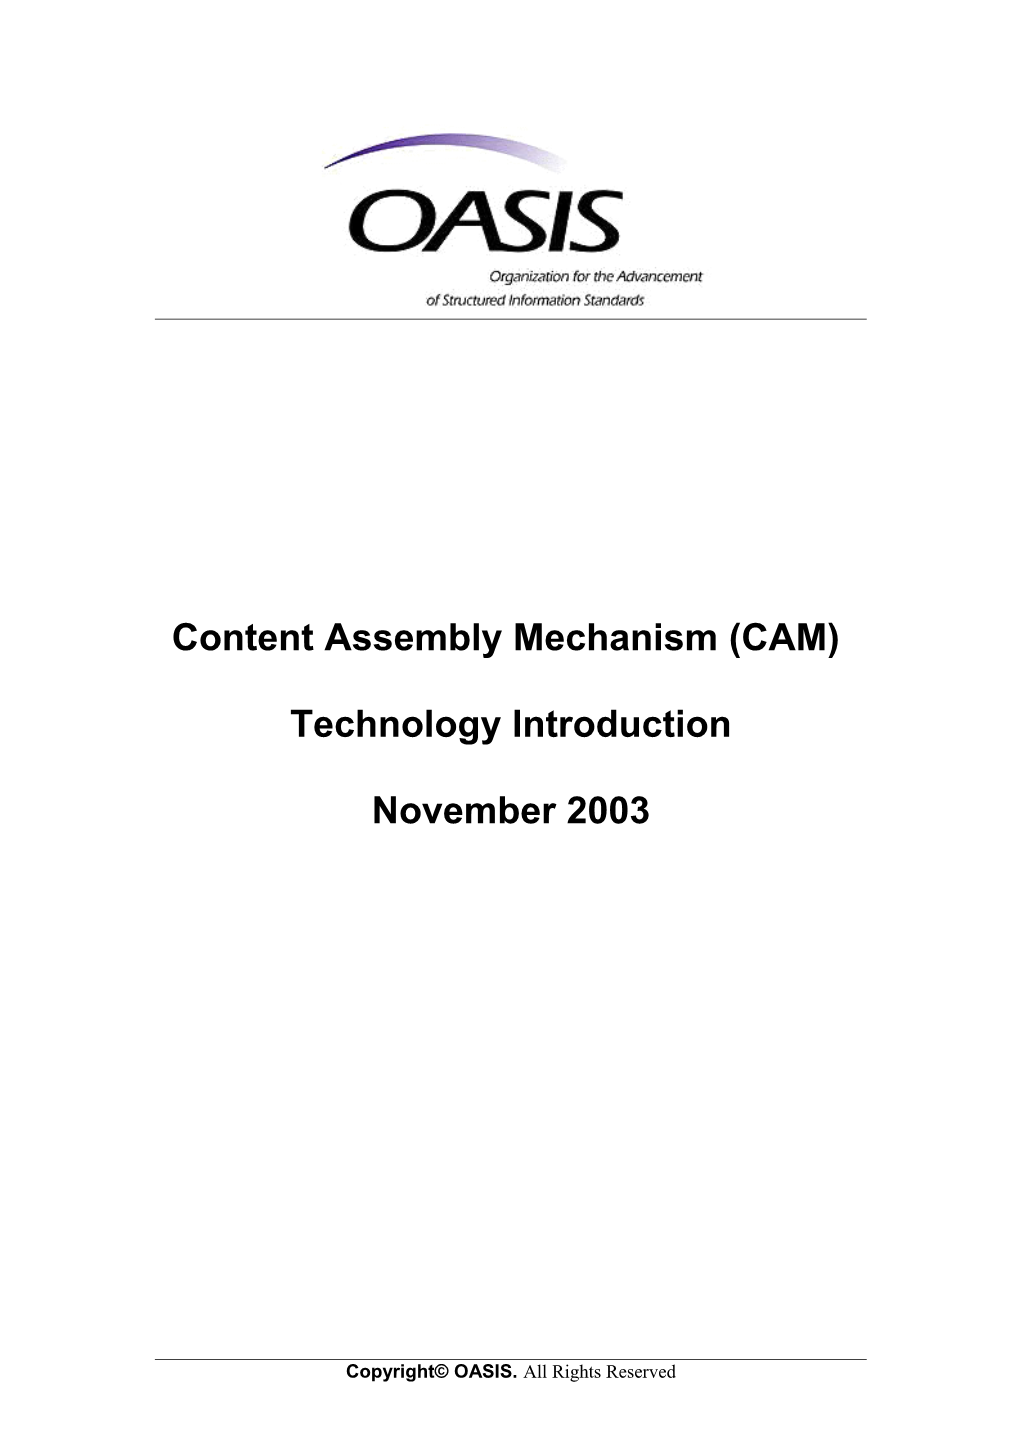 OASIS CAM Specifications